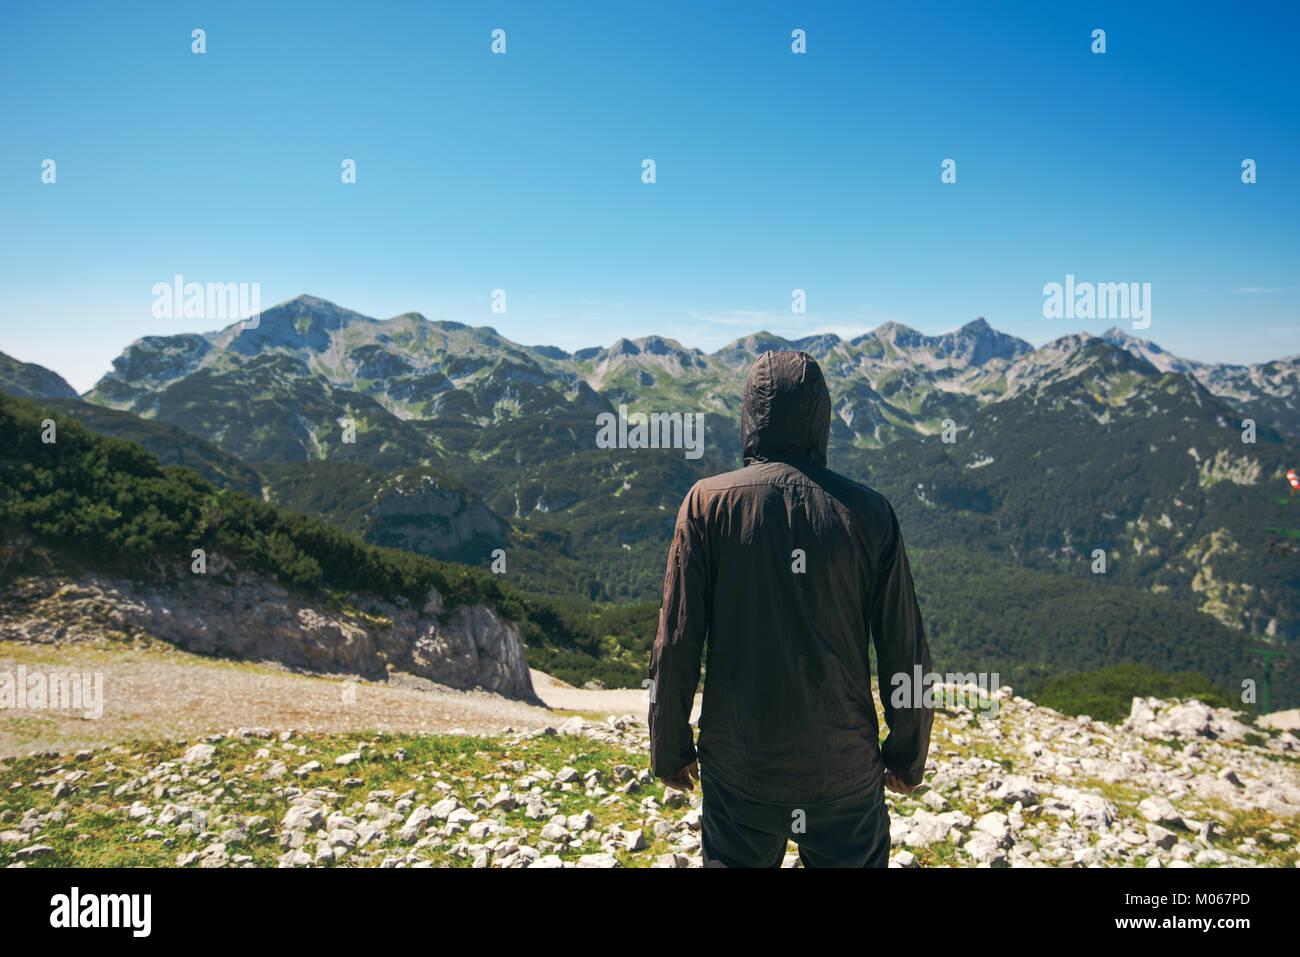 Mountain hiker at high viewpoint looking at the valley. Male tourist person in hooded jacket at mountain top enjoying the view. Stock Photo